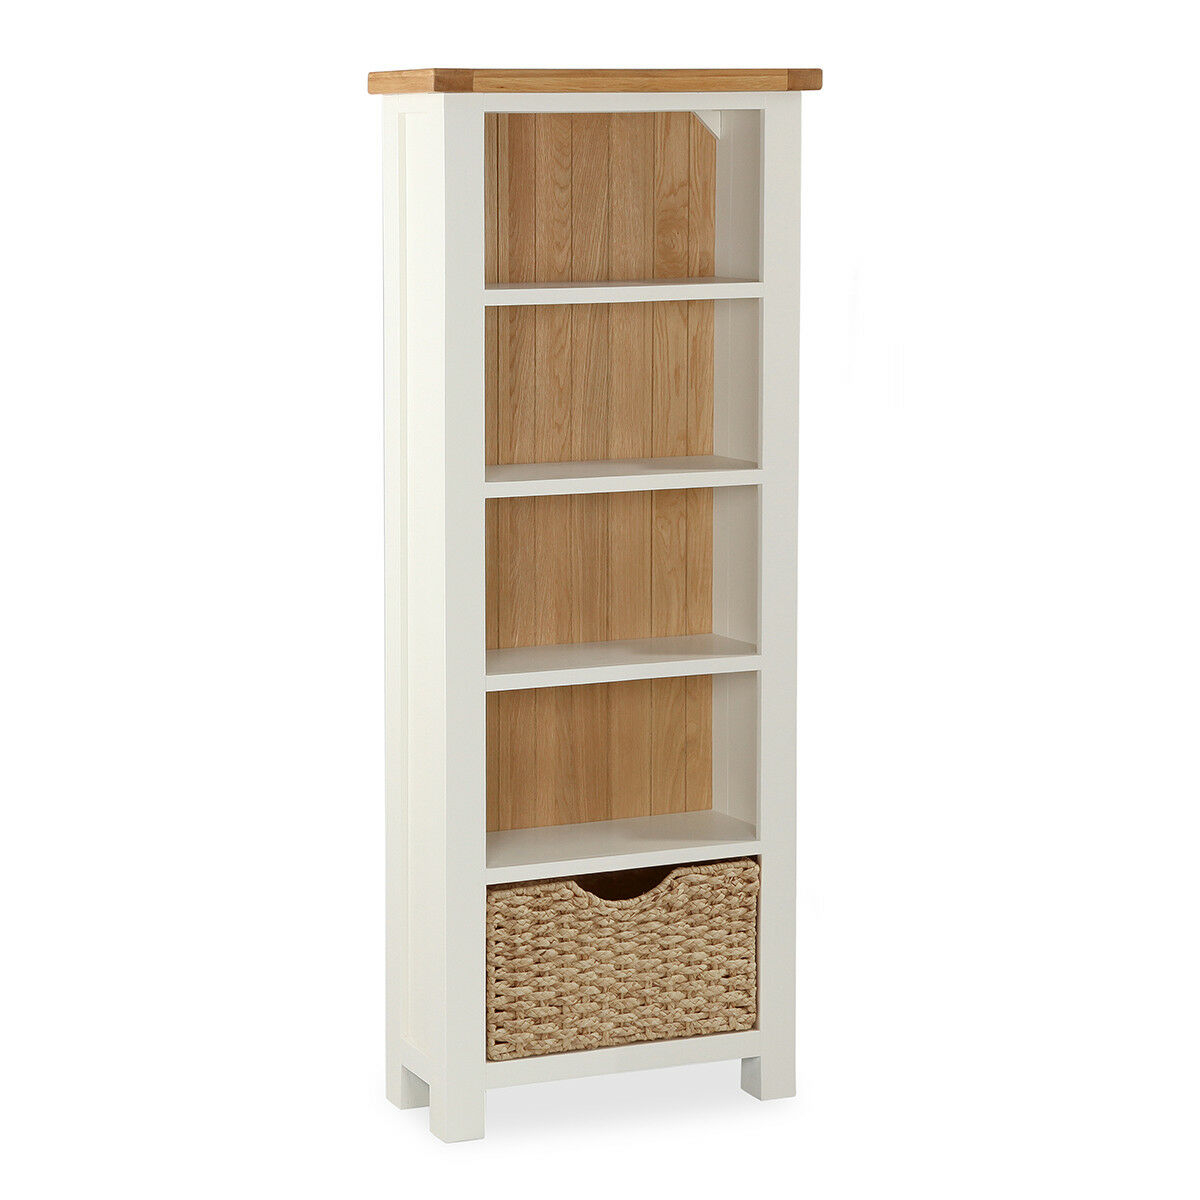 Details About Hampshire Cream Painted Oak Top Tall Slim Bookcase With Storage Basket throughout size 1200 X 1200